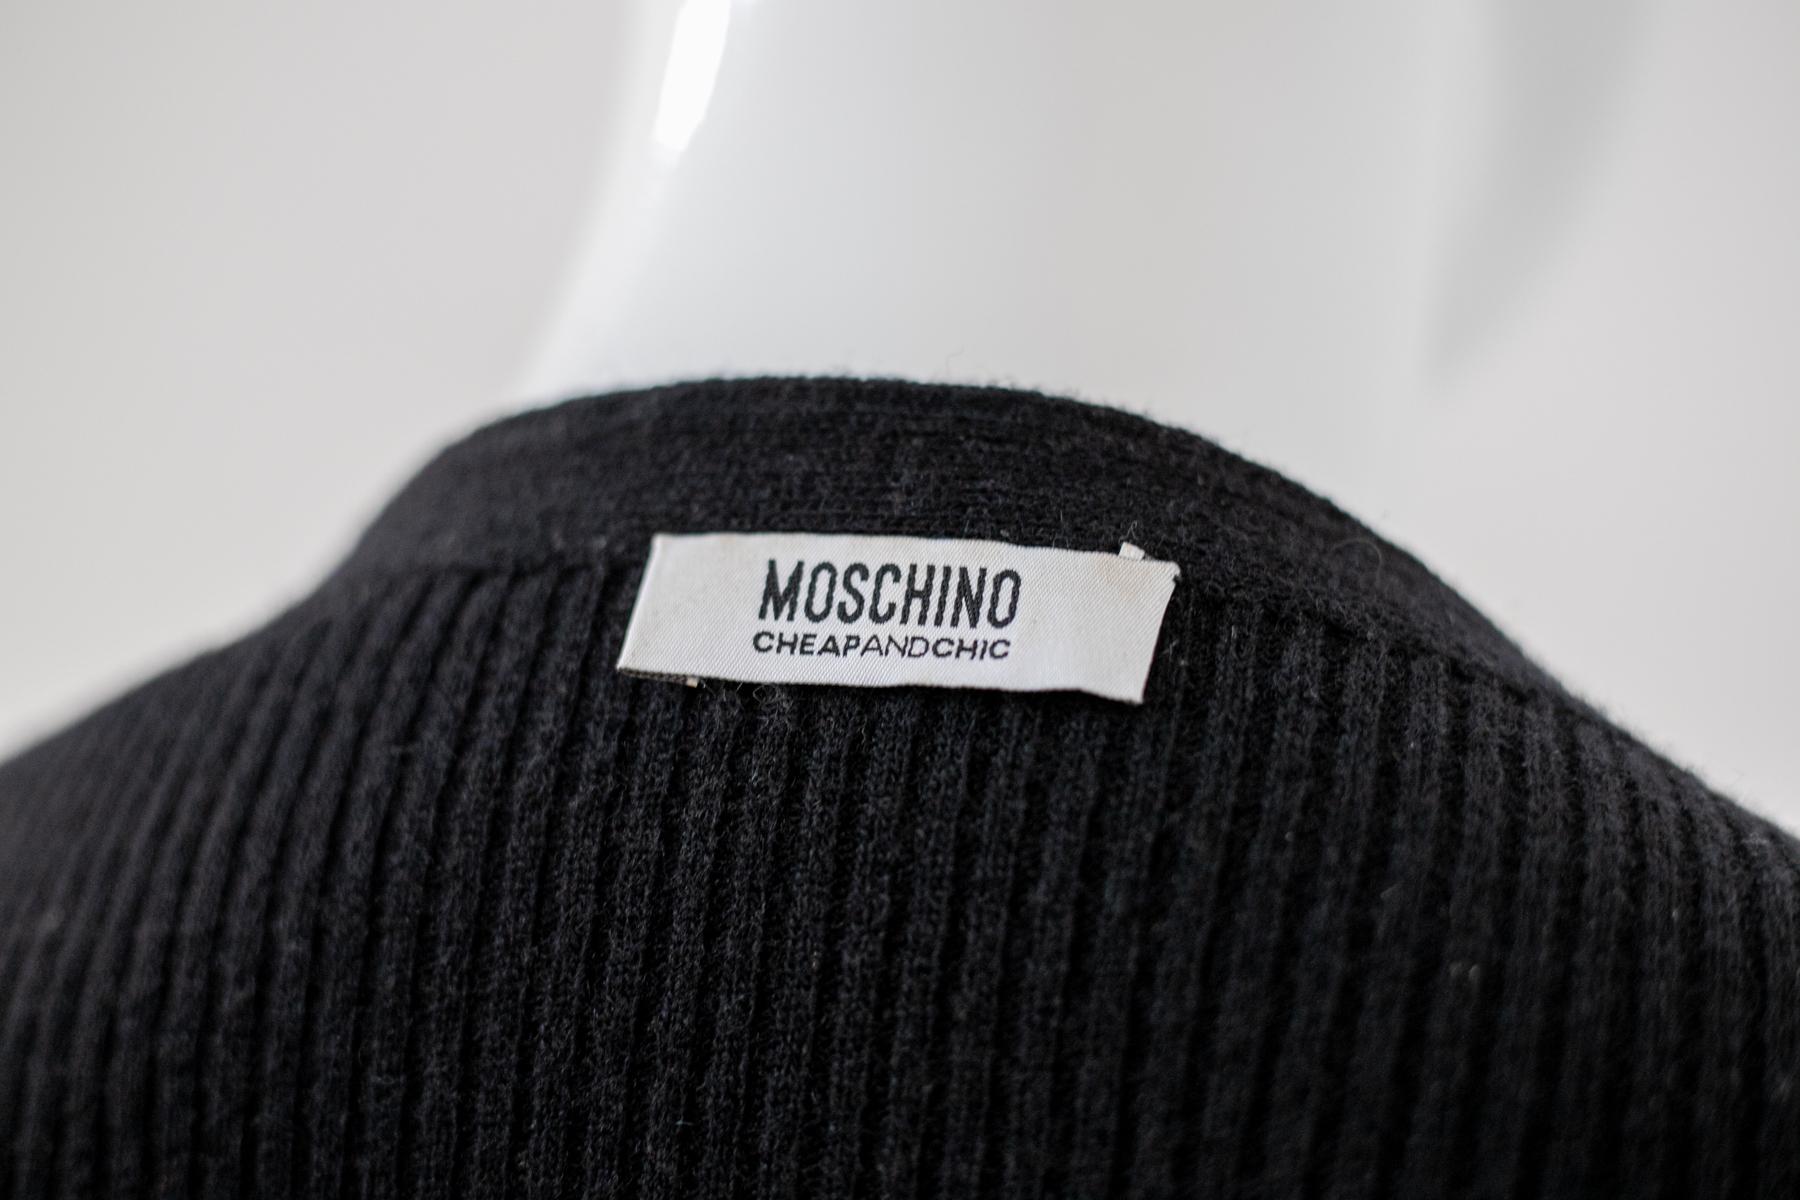 Gorgeous Moschino wool long sleeve t-shirt from the 1990s, made in Italy.
The shirt is very simple, very close-fitting, reaching to navel height. The uniqueness of this shirt is in the deep V-neckline: decorated with silver flowers created with